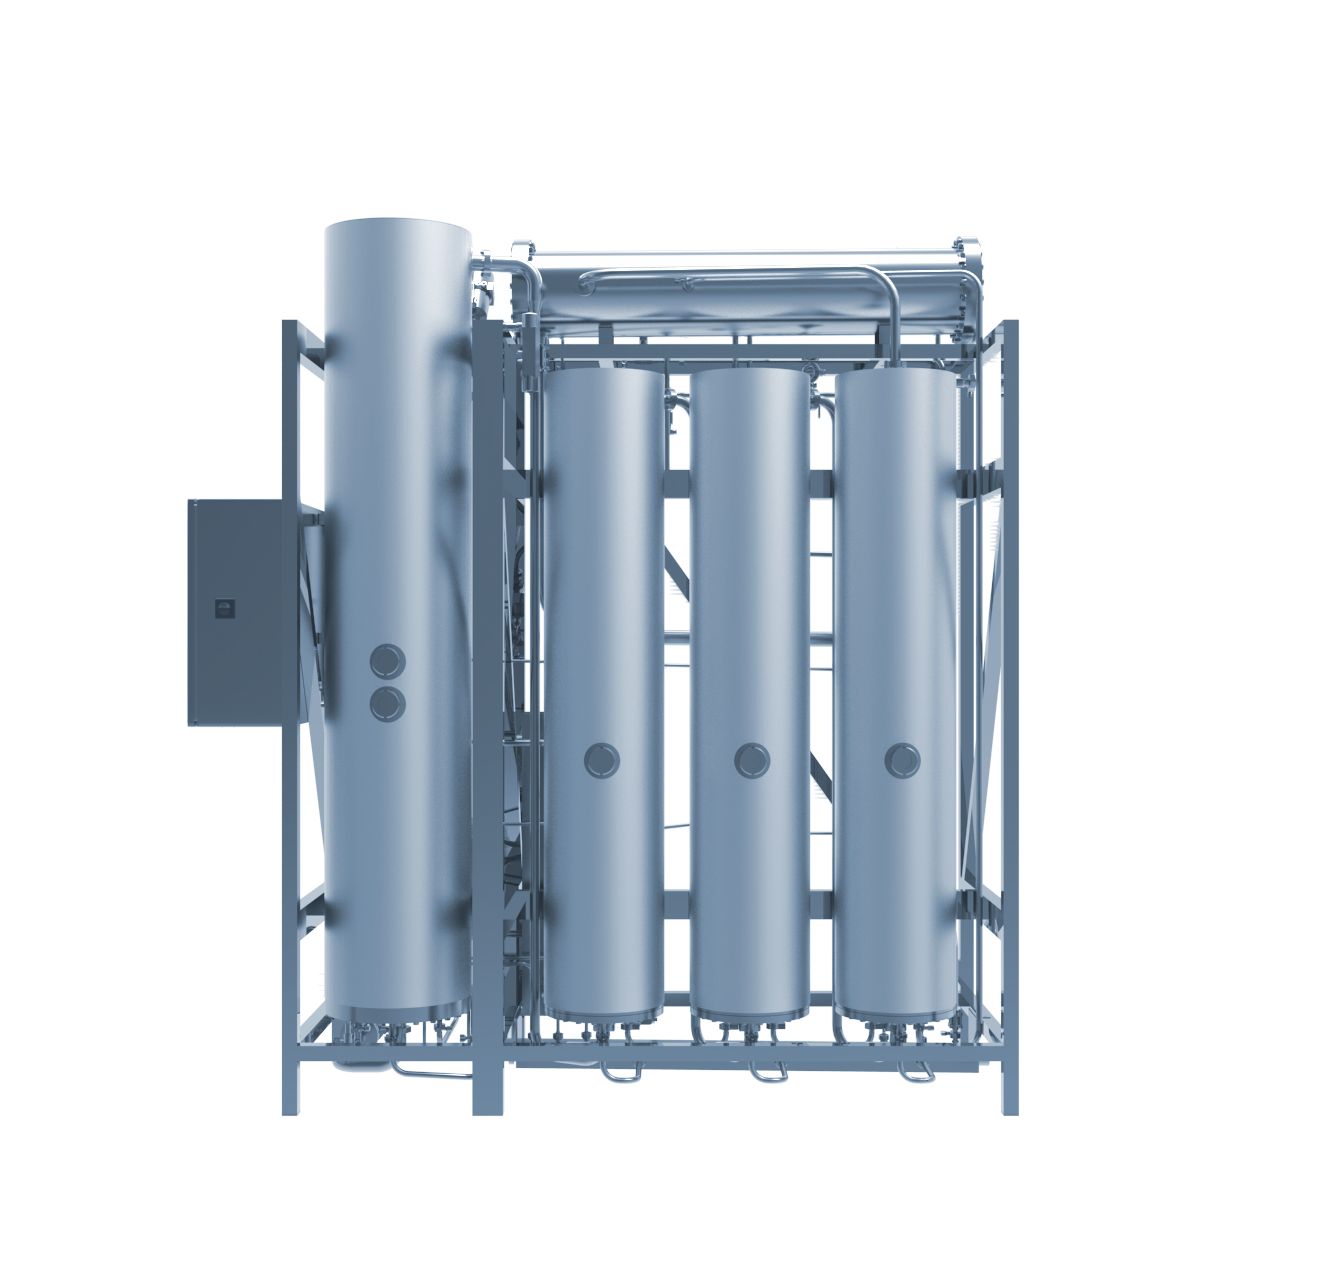 Industrial AQUA-NOVA® COMBI multi-effect still for WFI and Pure Steam production, showcasing a series of vertical cylindrical chambers with piping and control box, designed for simultaneous water purification processes